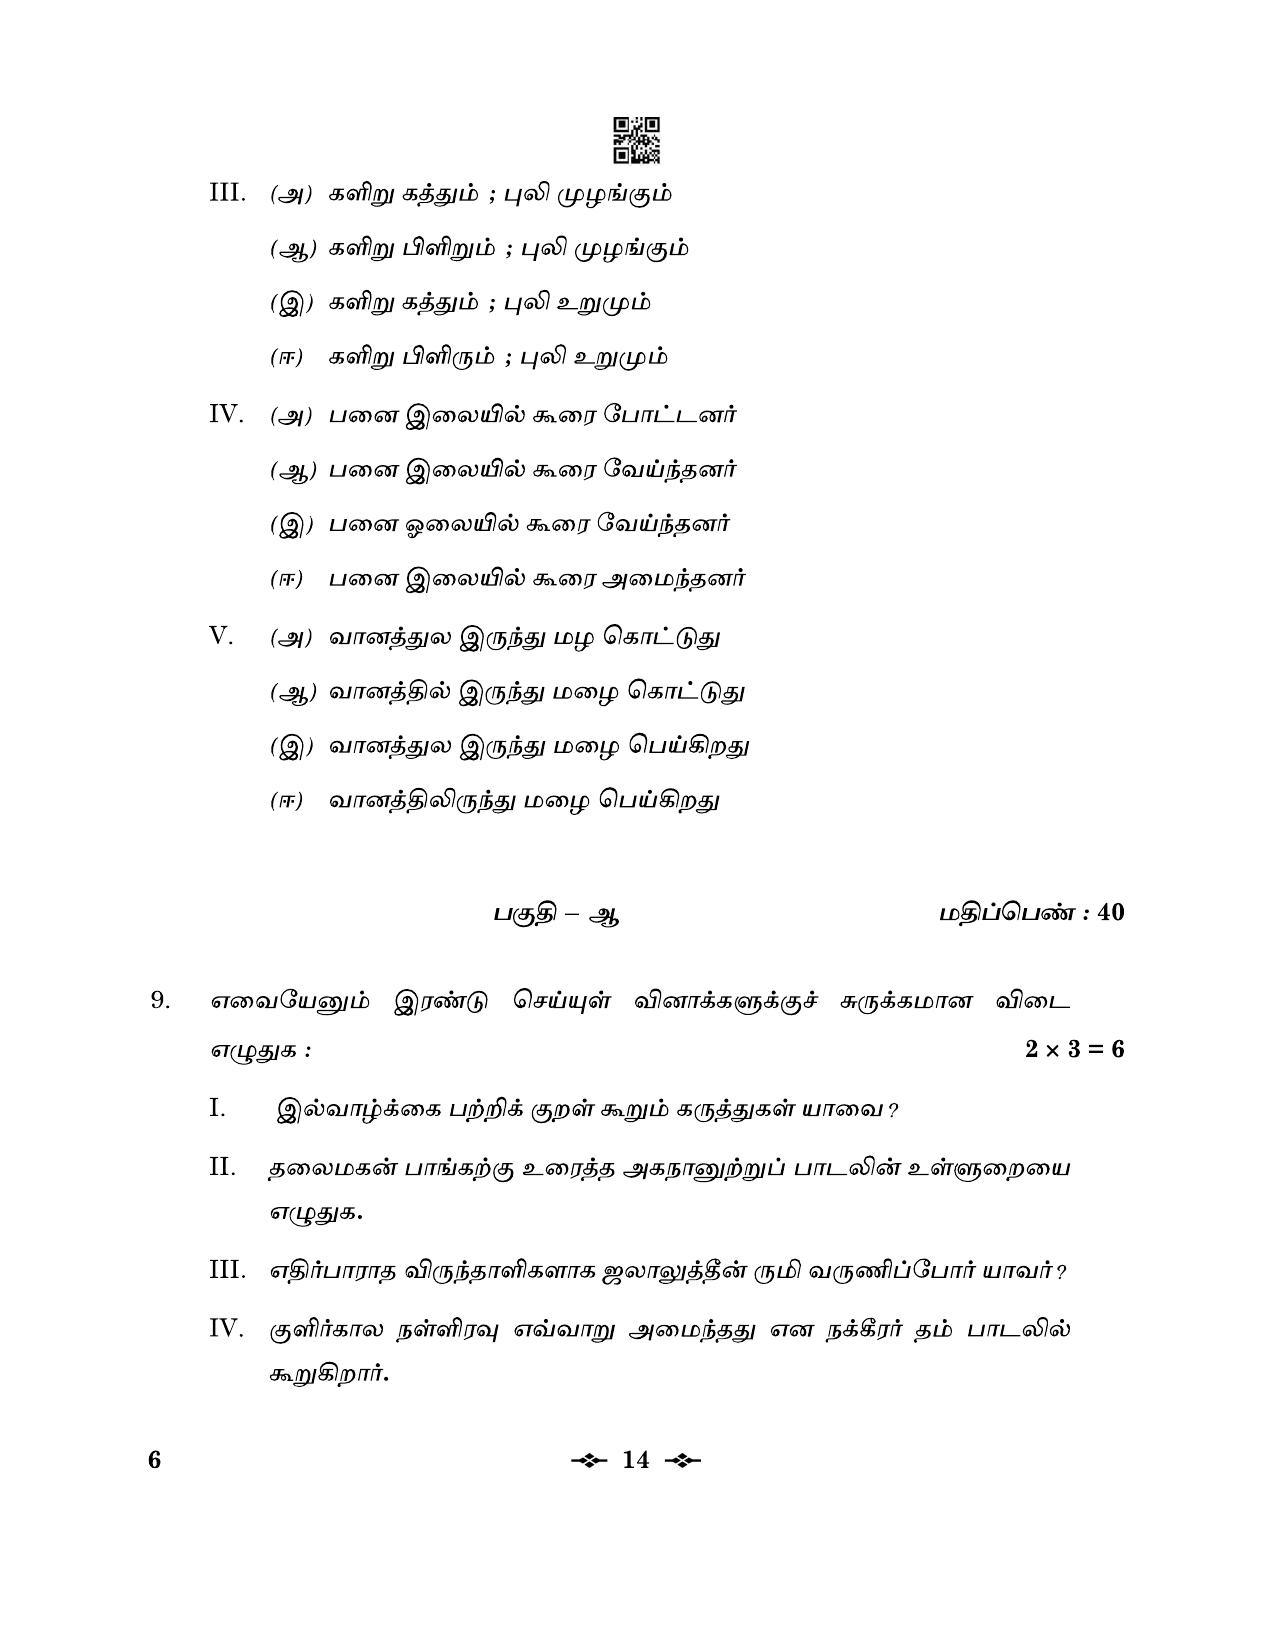 CBSE Class 12 6_Tamil 2023 Question Paper - Page 14